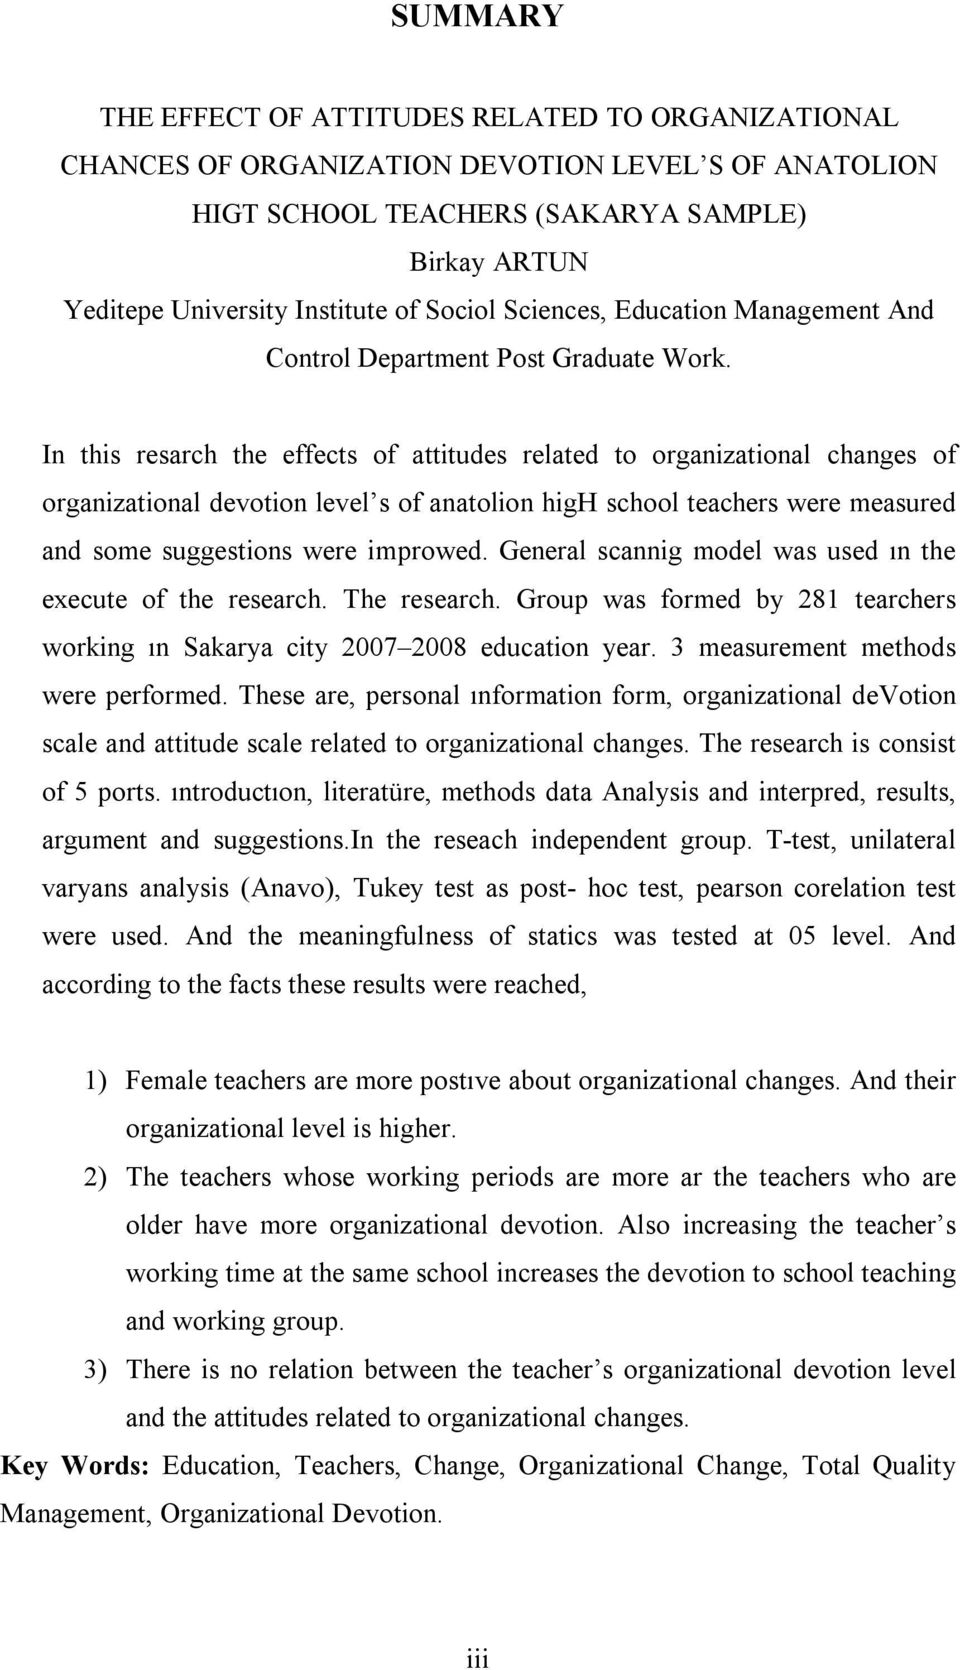 In this resarch the effects of attitudes related to organizational changes of organizational devotion level s of anatolion high school teachers were measured and some suggestions were improwed.